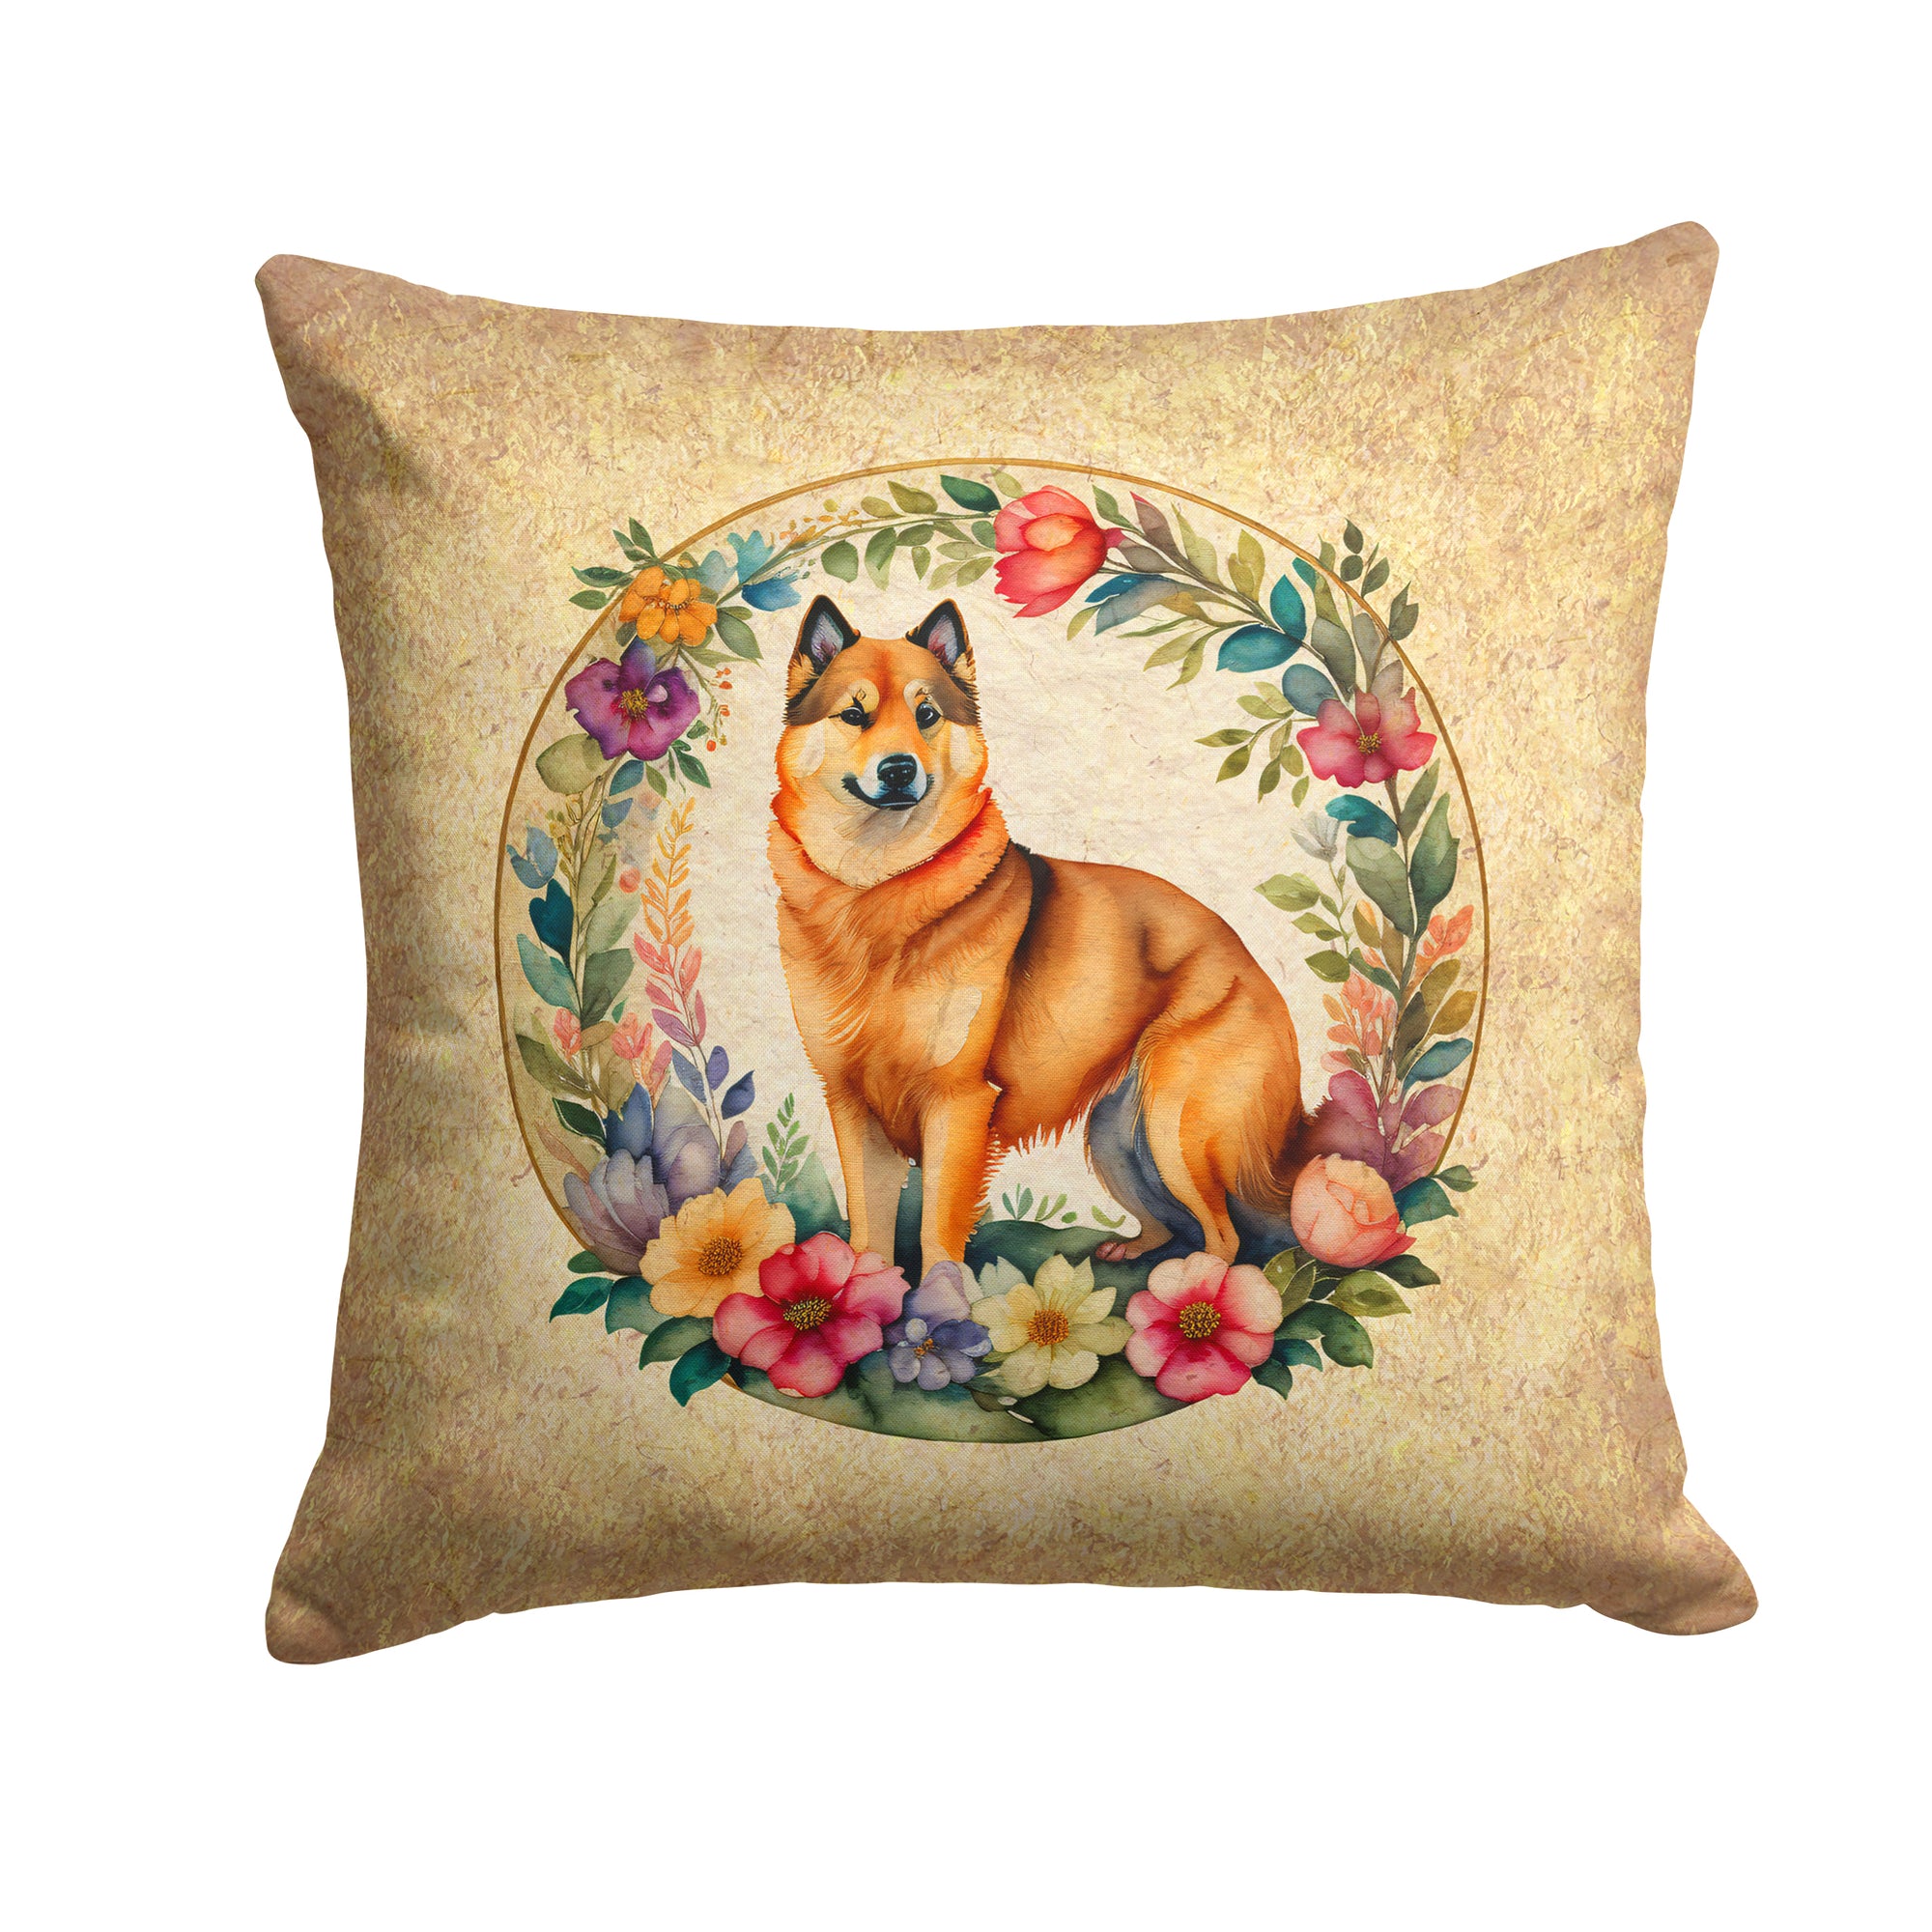 Buy this Finnish Spitz and Flowers Fabric Decorative Pillow